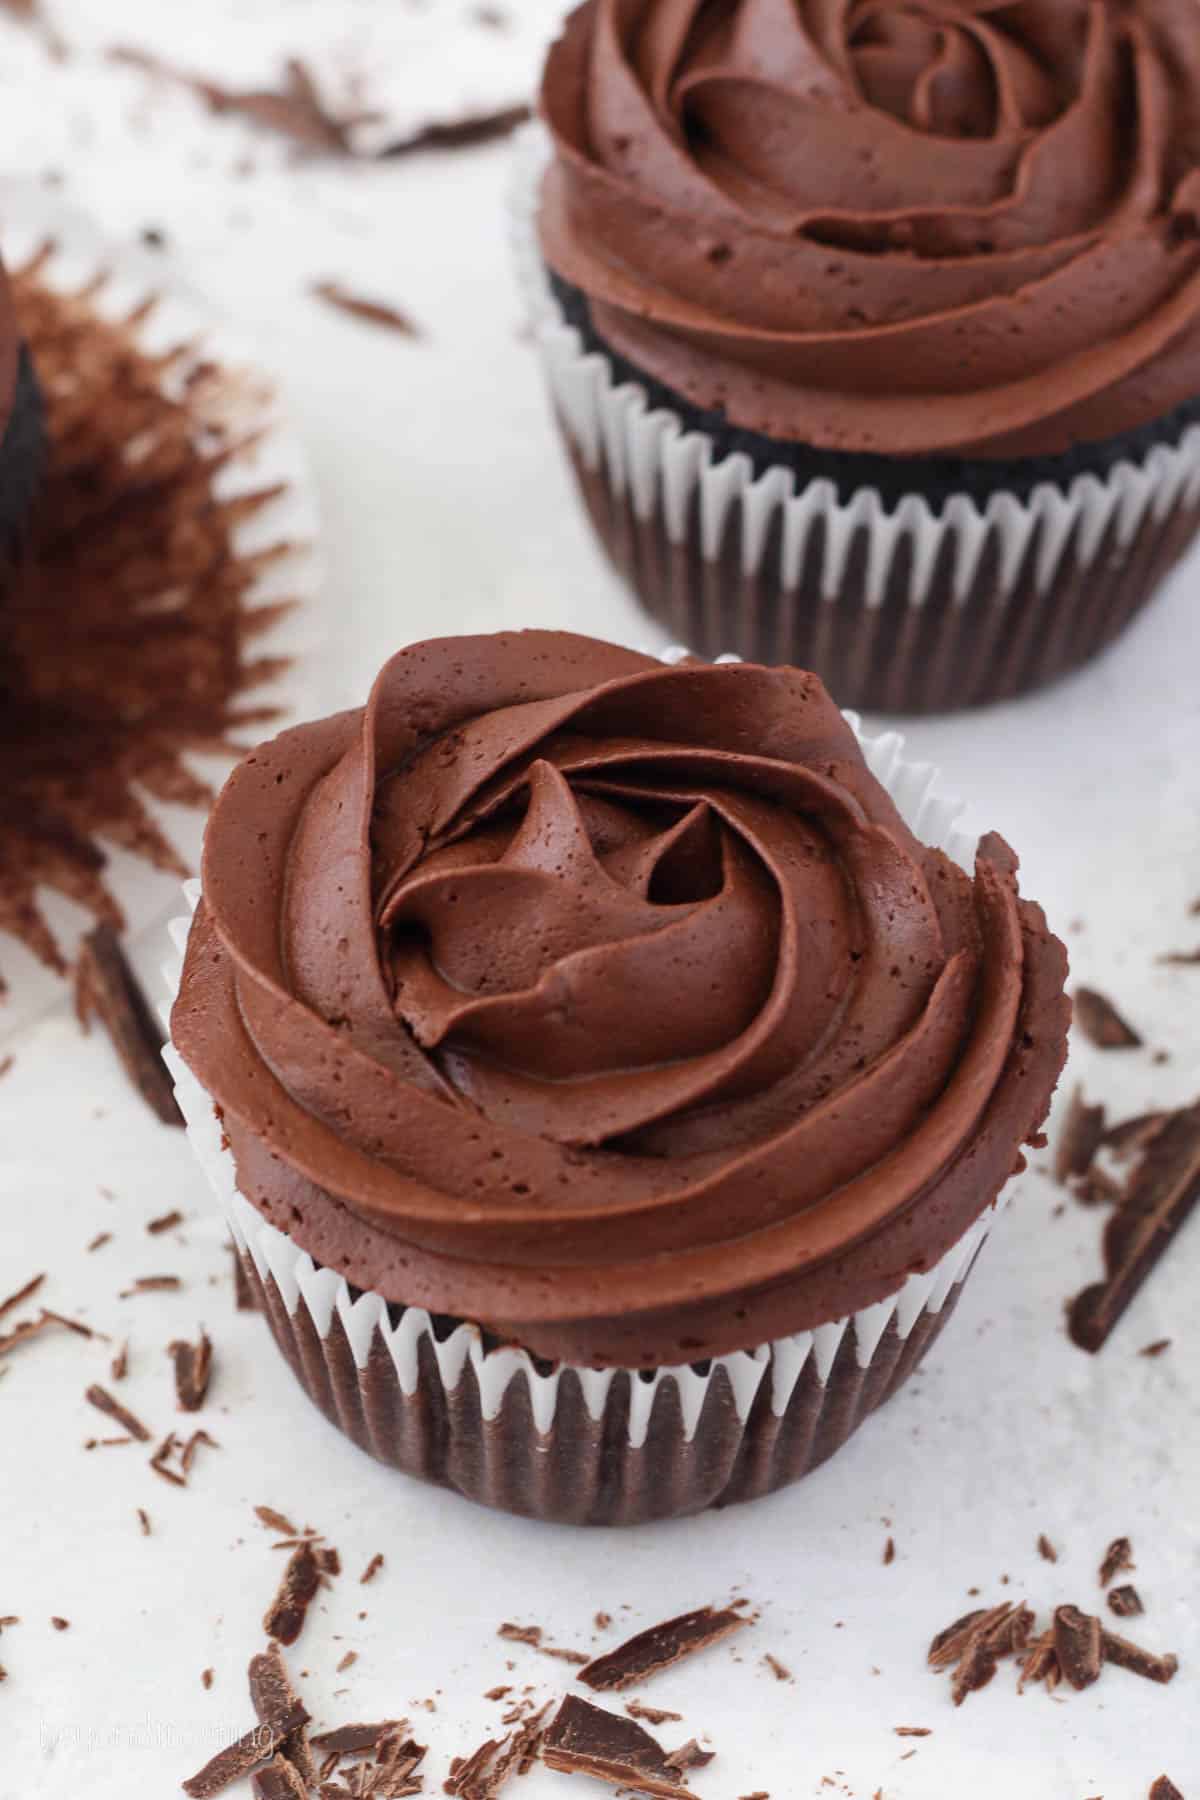 Two chocolate cupcakes topped with swirls of whipped ganache frosting.